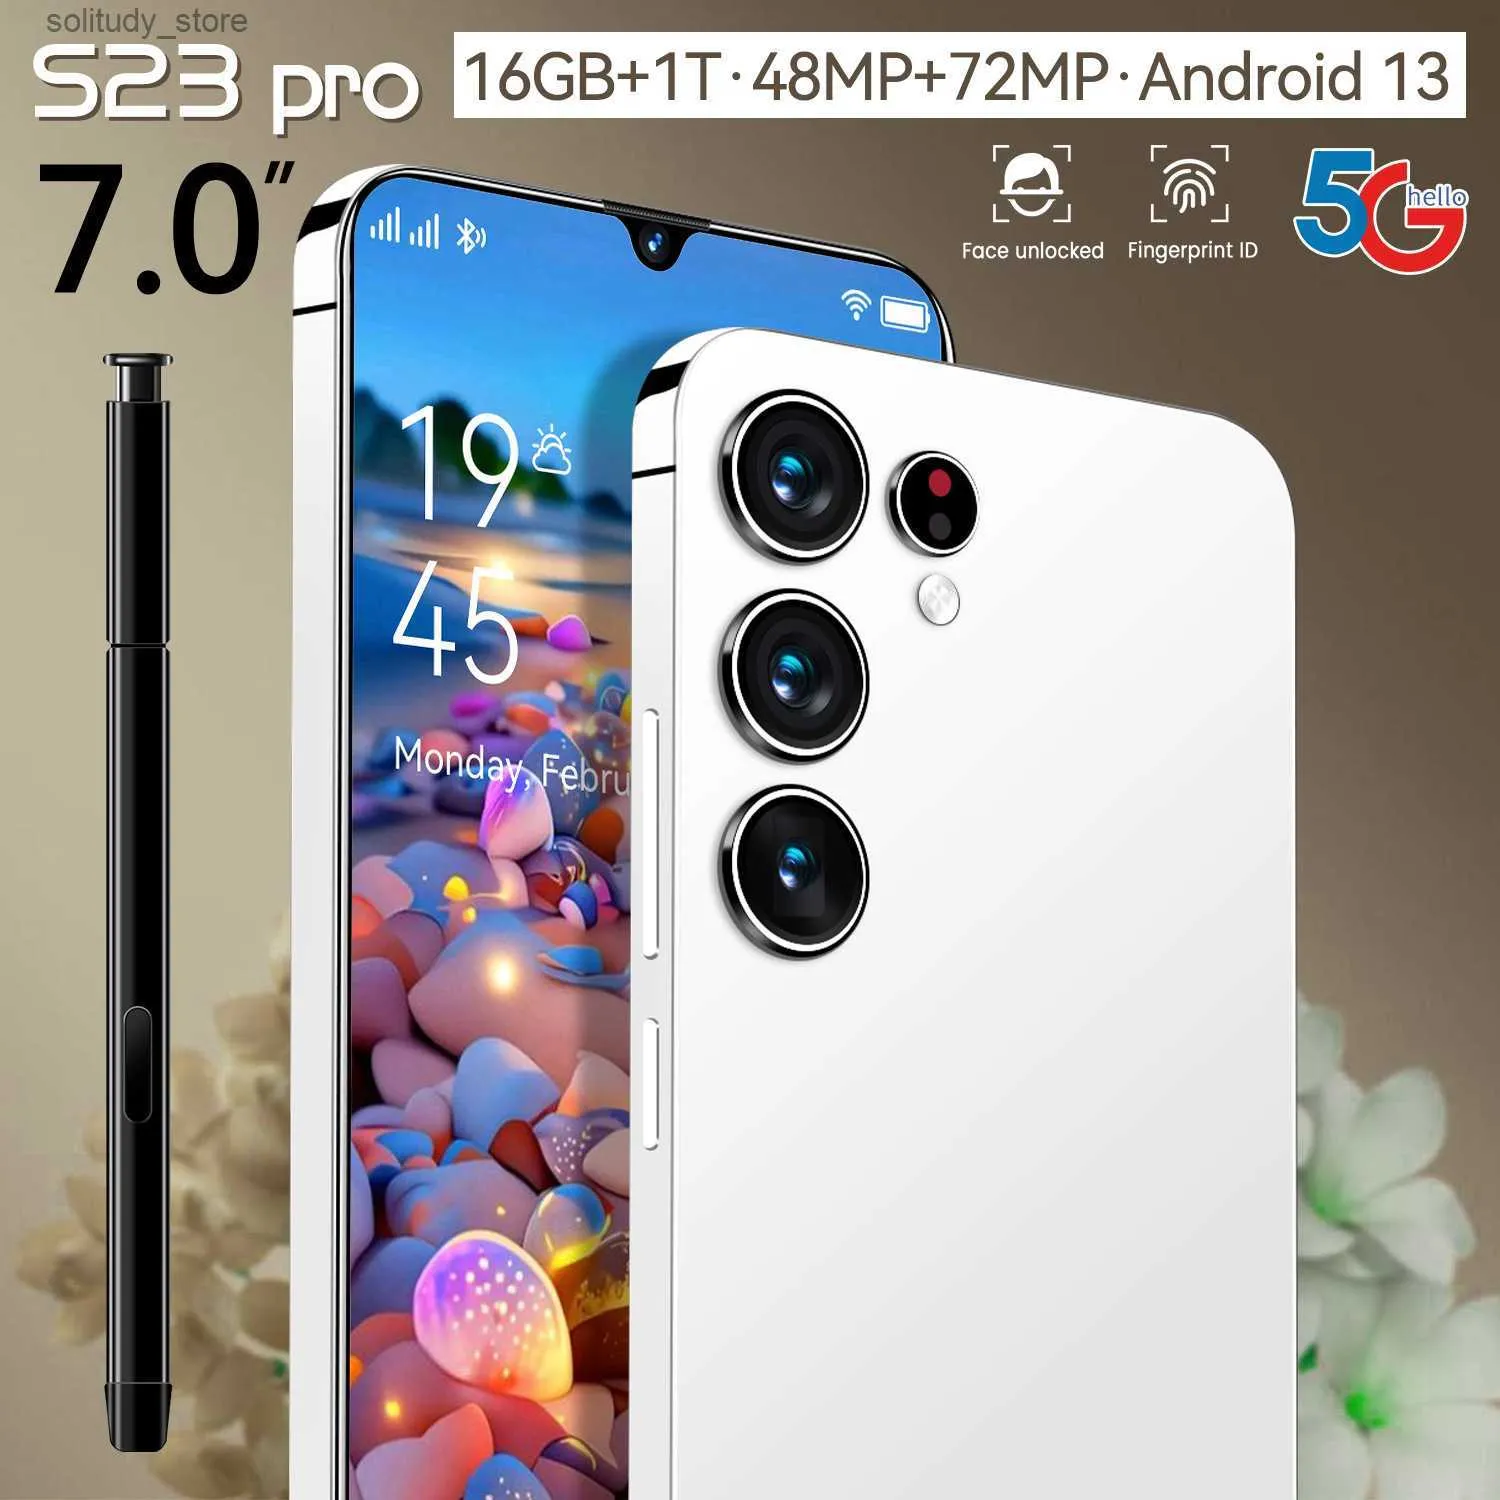 Mobile phone S23 Pro 7.0 "large screen (1+8) memory all-in-one popular smartphone Q240328